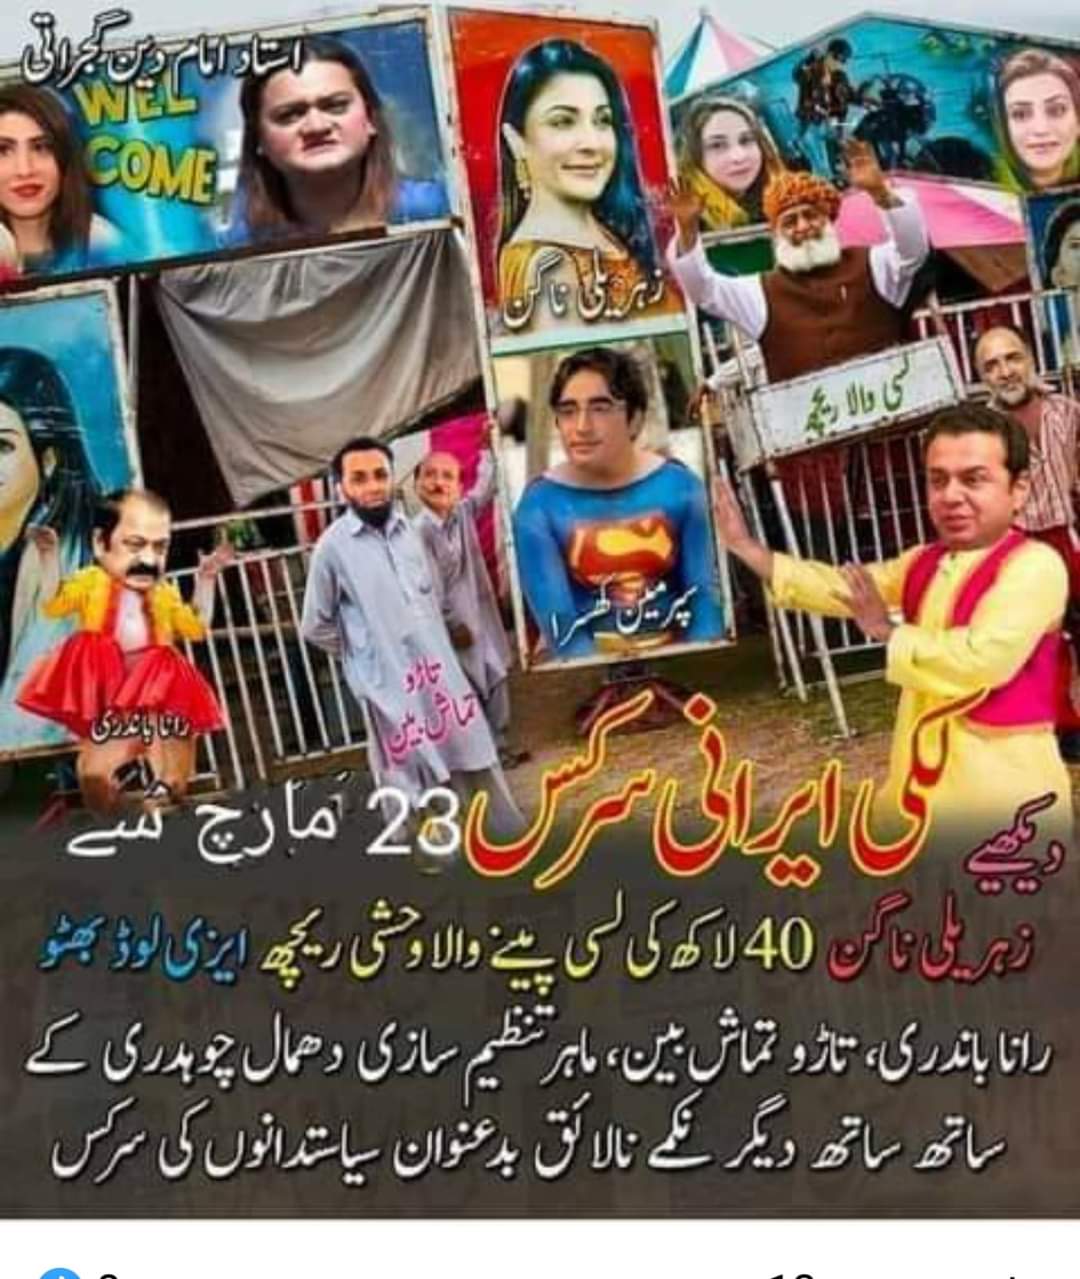 You can find such posters at social media walls of PTI supports